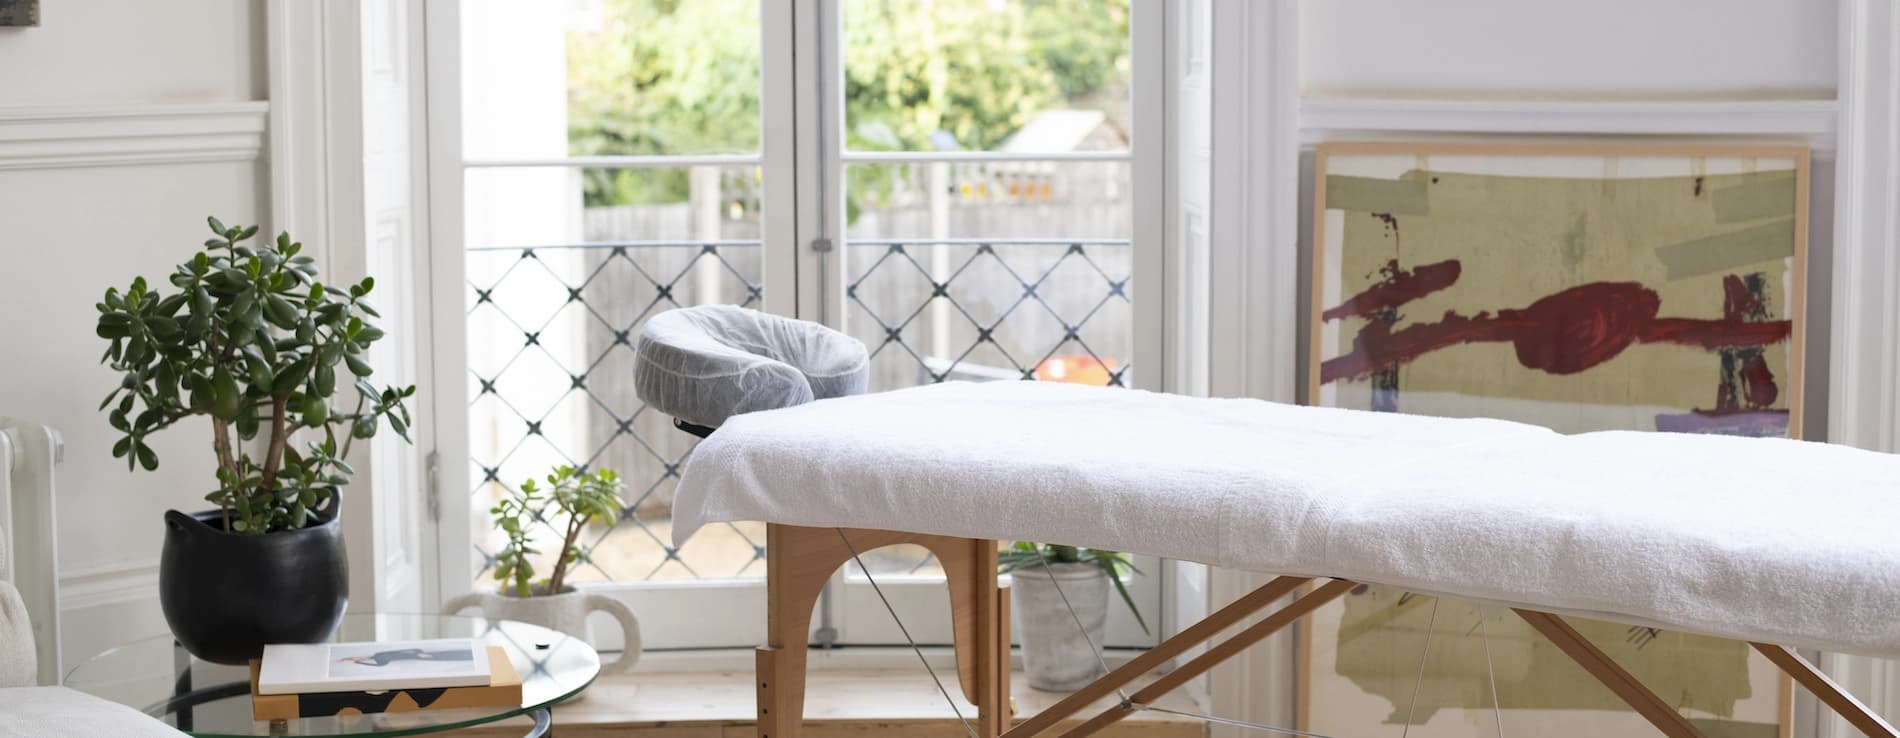 A massage table set up in a London apartment